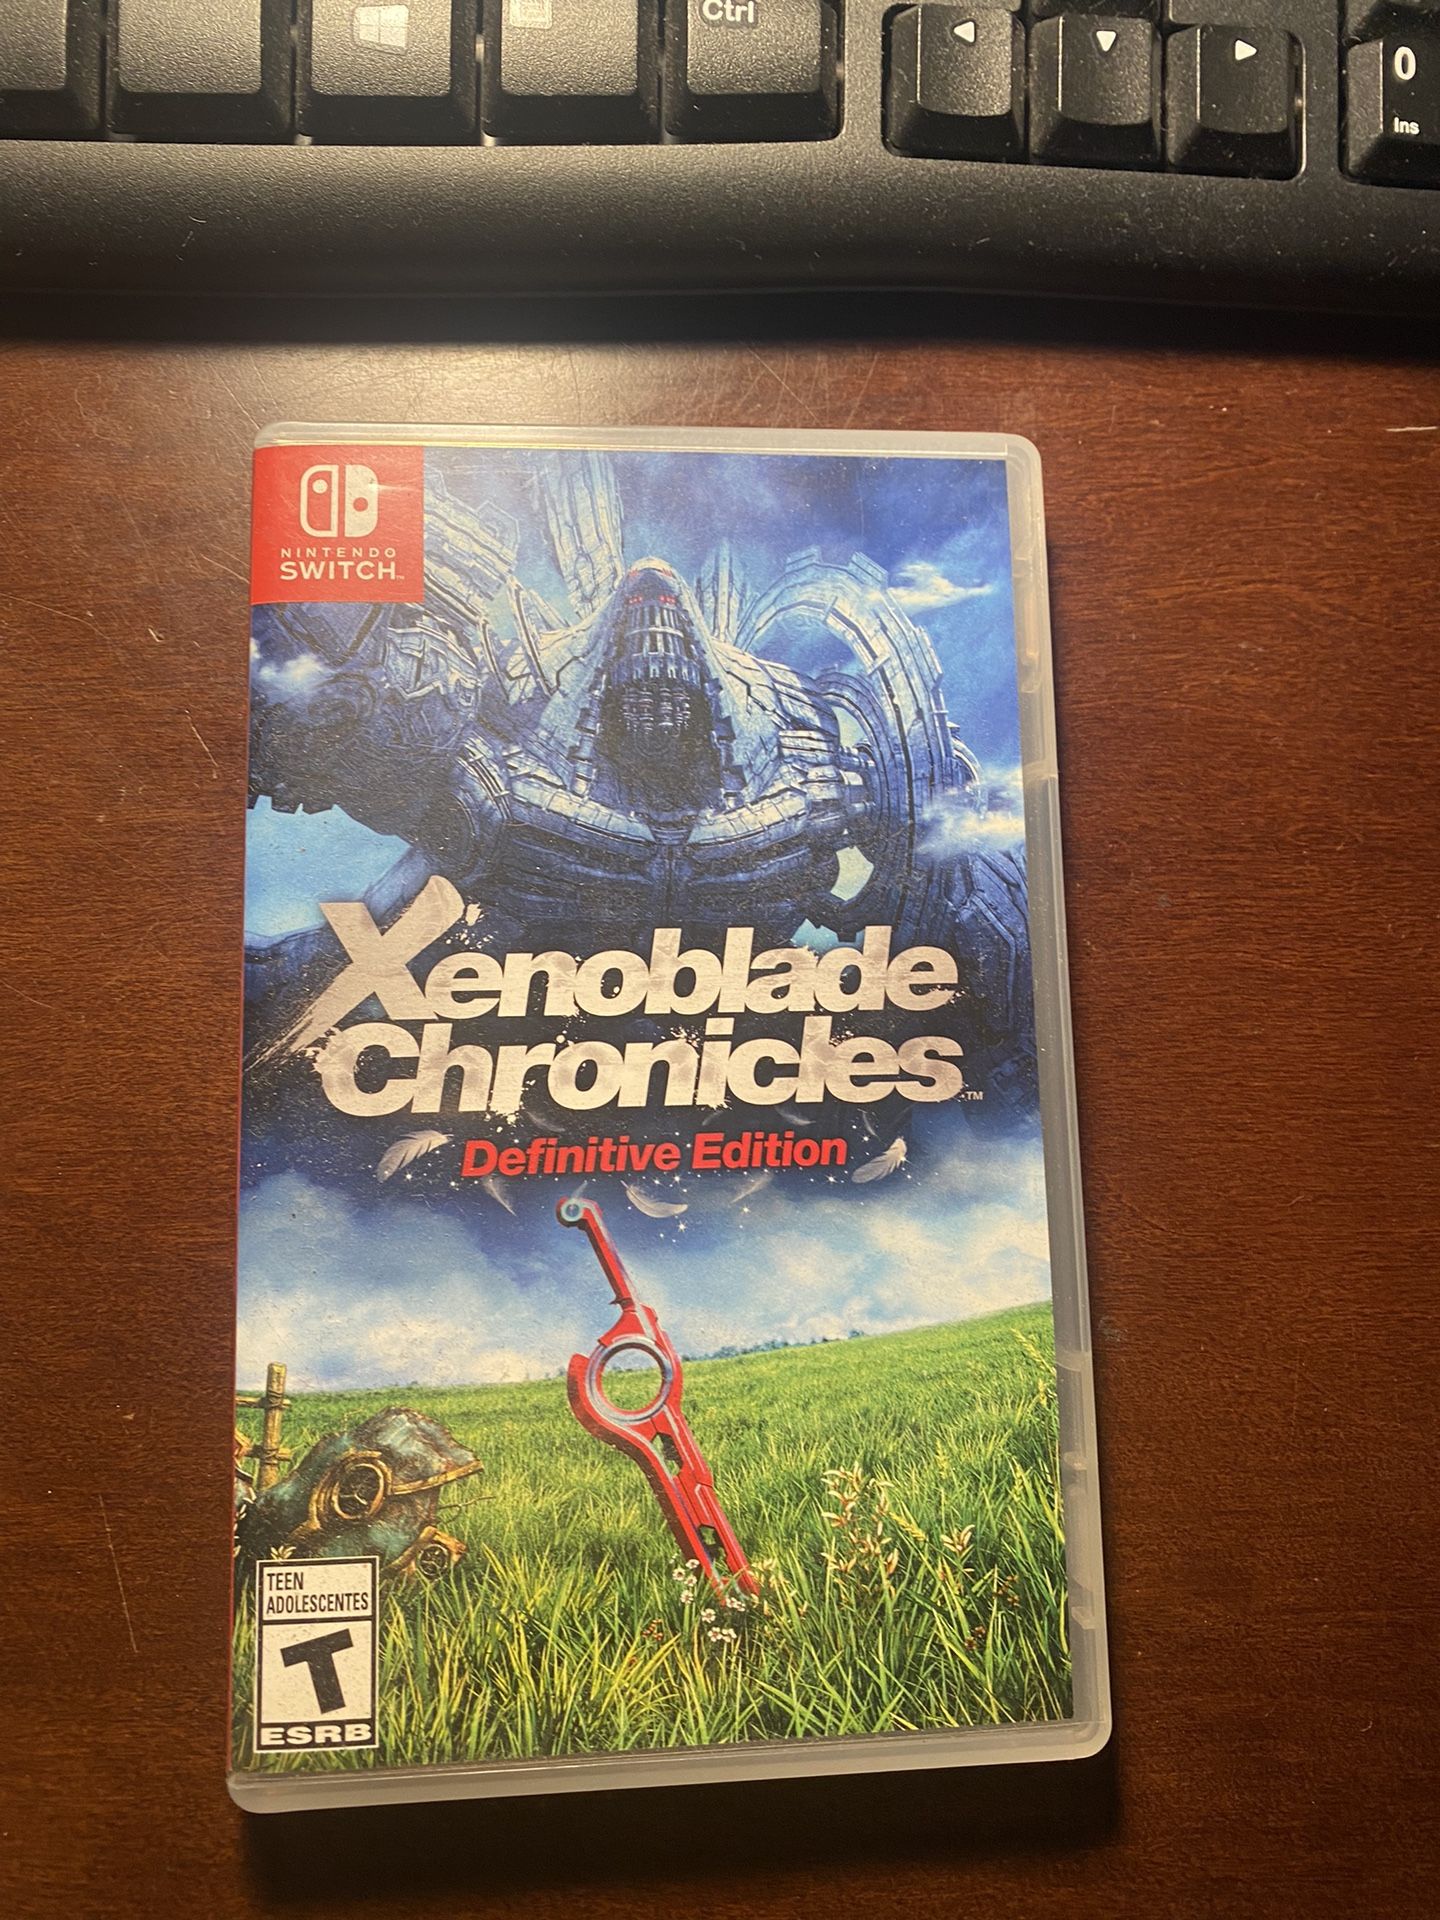 Xenoblade Chronicles Definitive Edition for Nintendo Switch